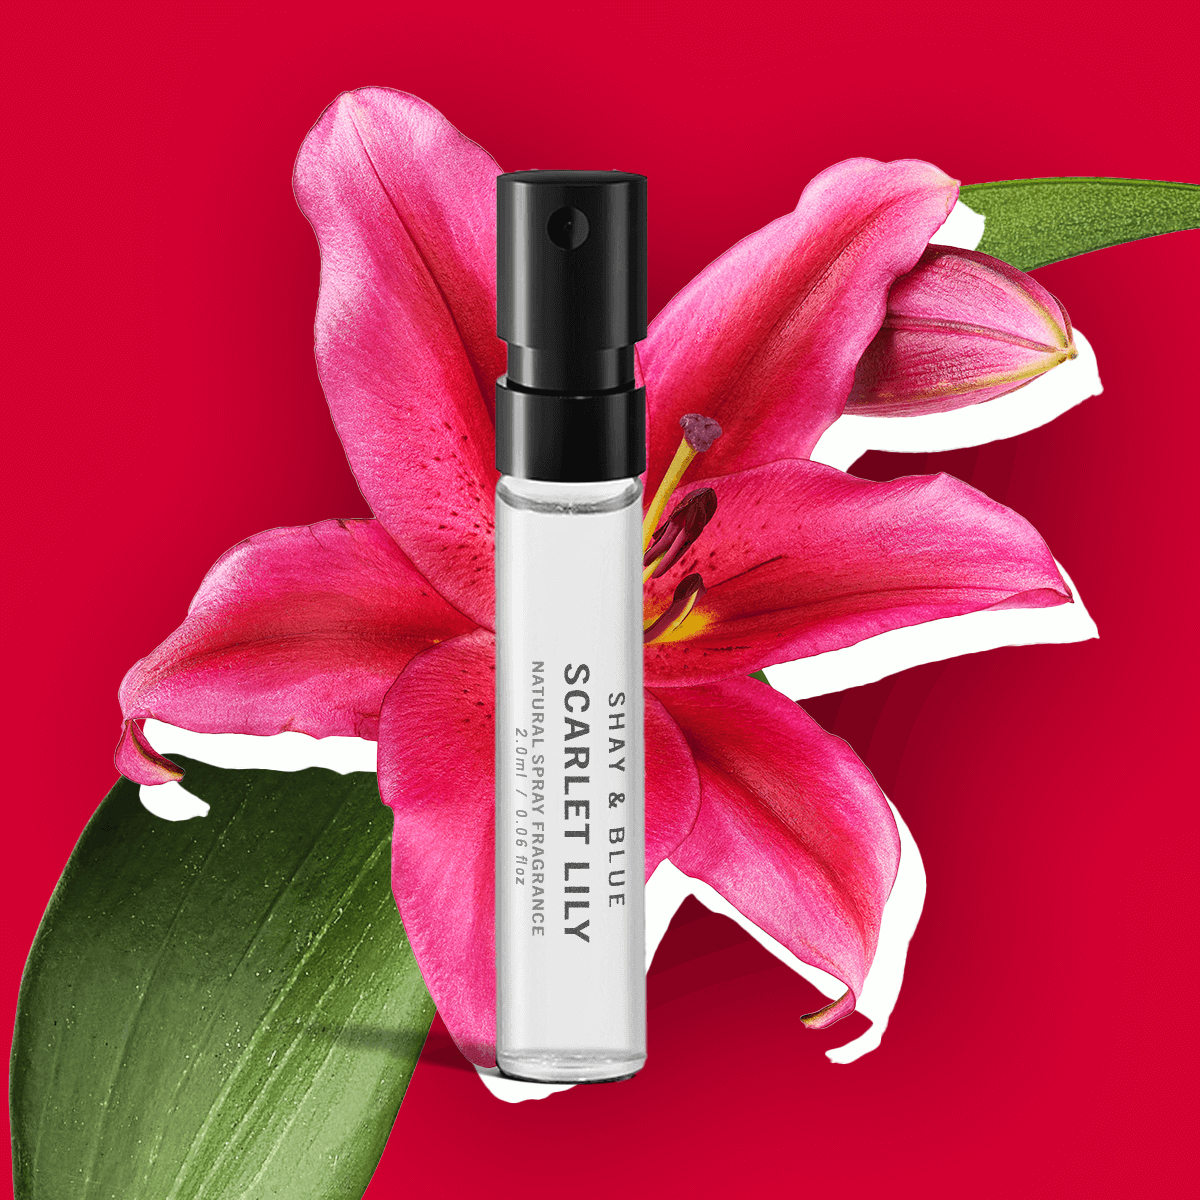 Scarlet Lily Fragrance 2ml | Big Blooms of Scarlet lily with undertones of ylang ylang. | Clean All Gender Fragrance | Shay & Blue